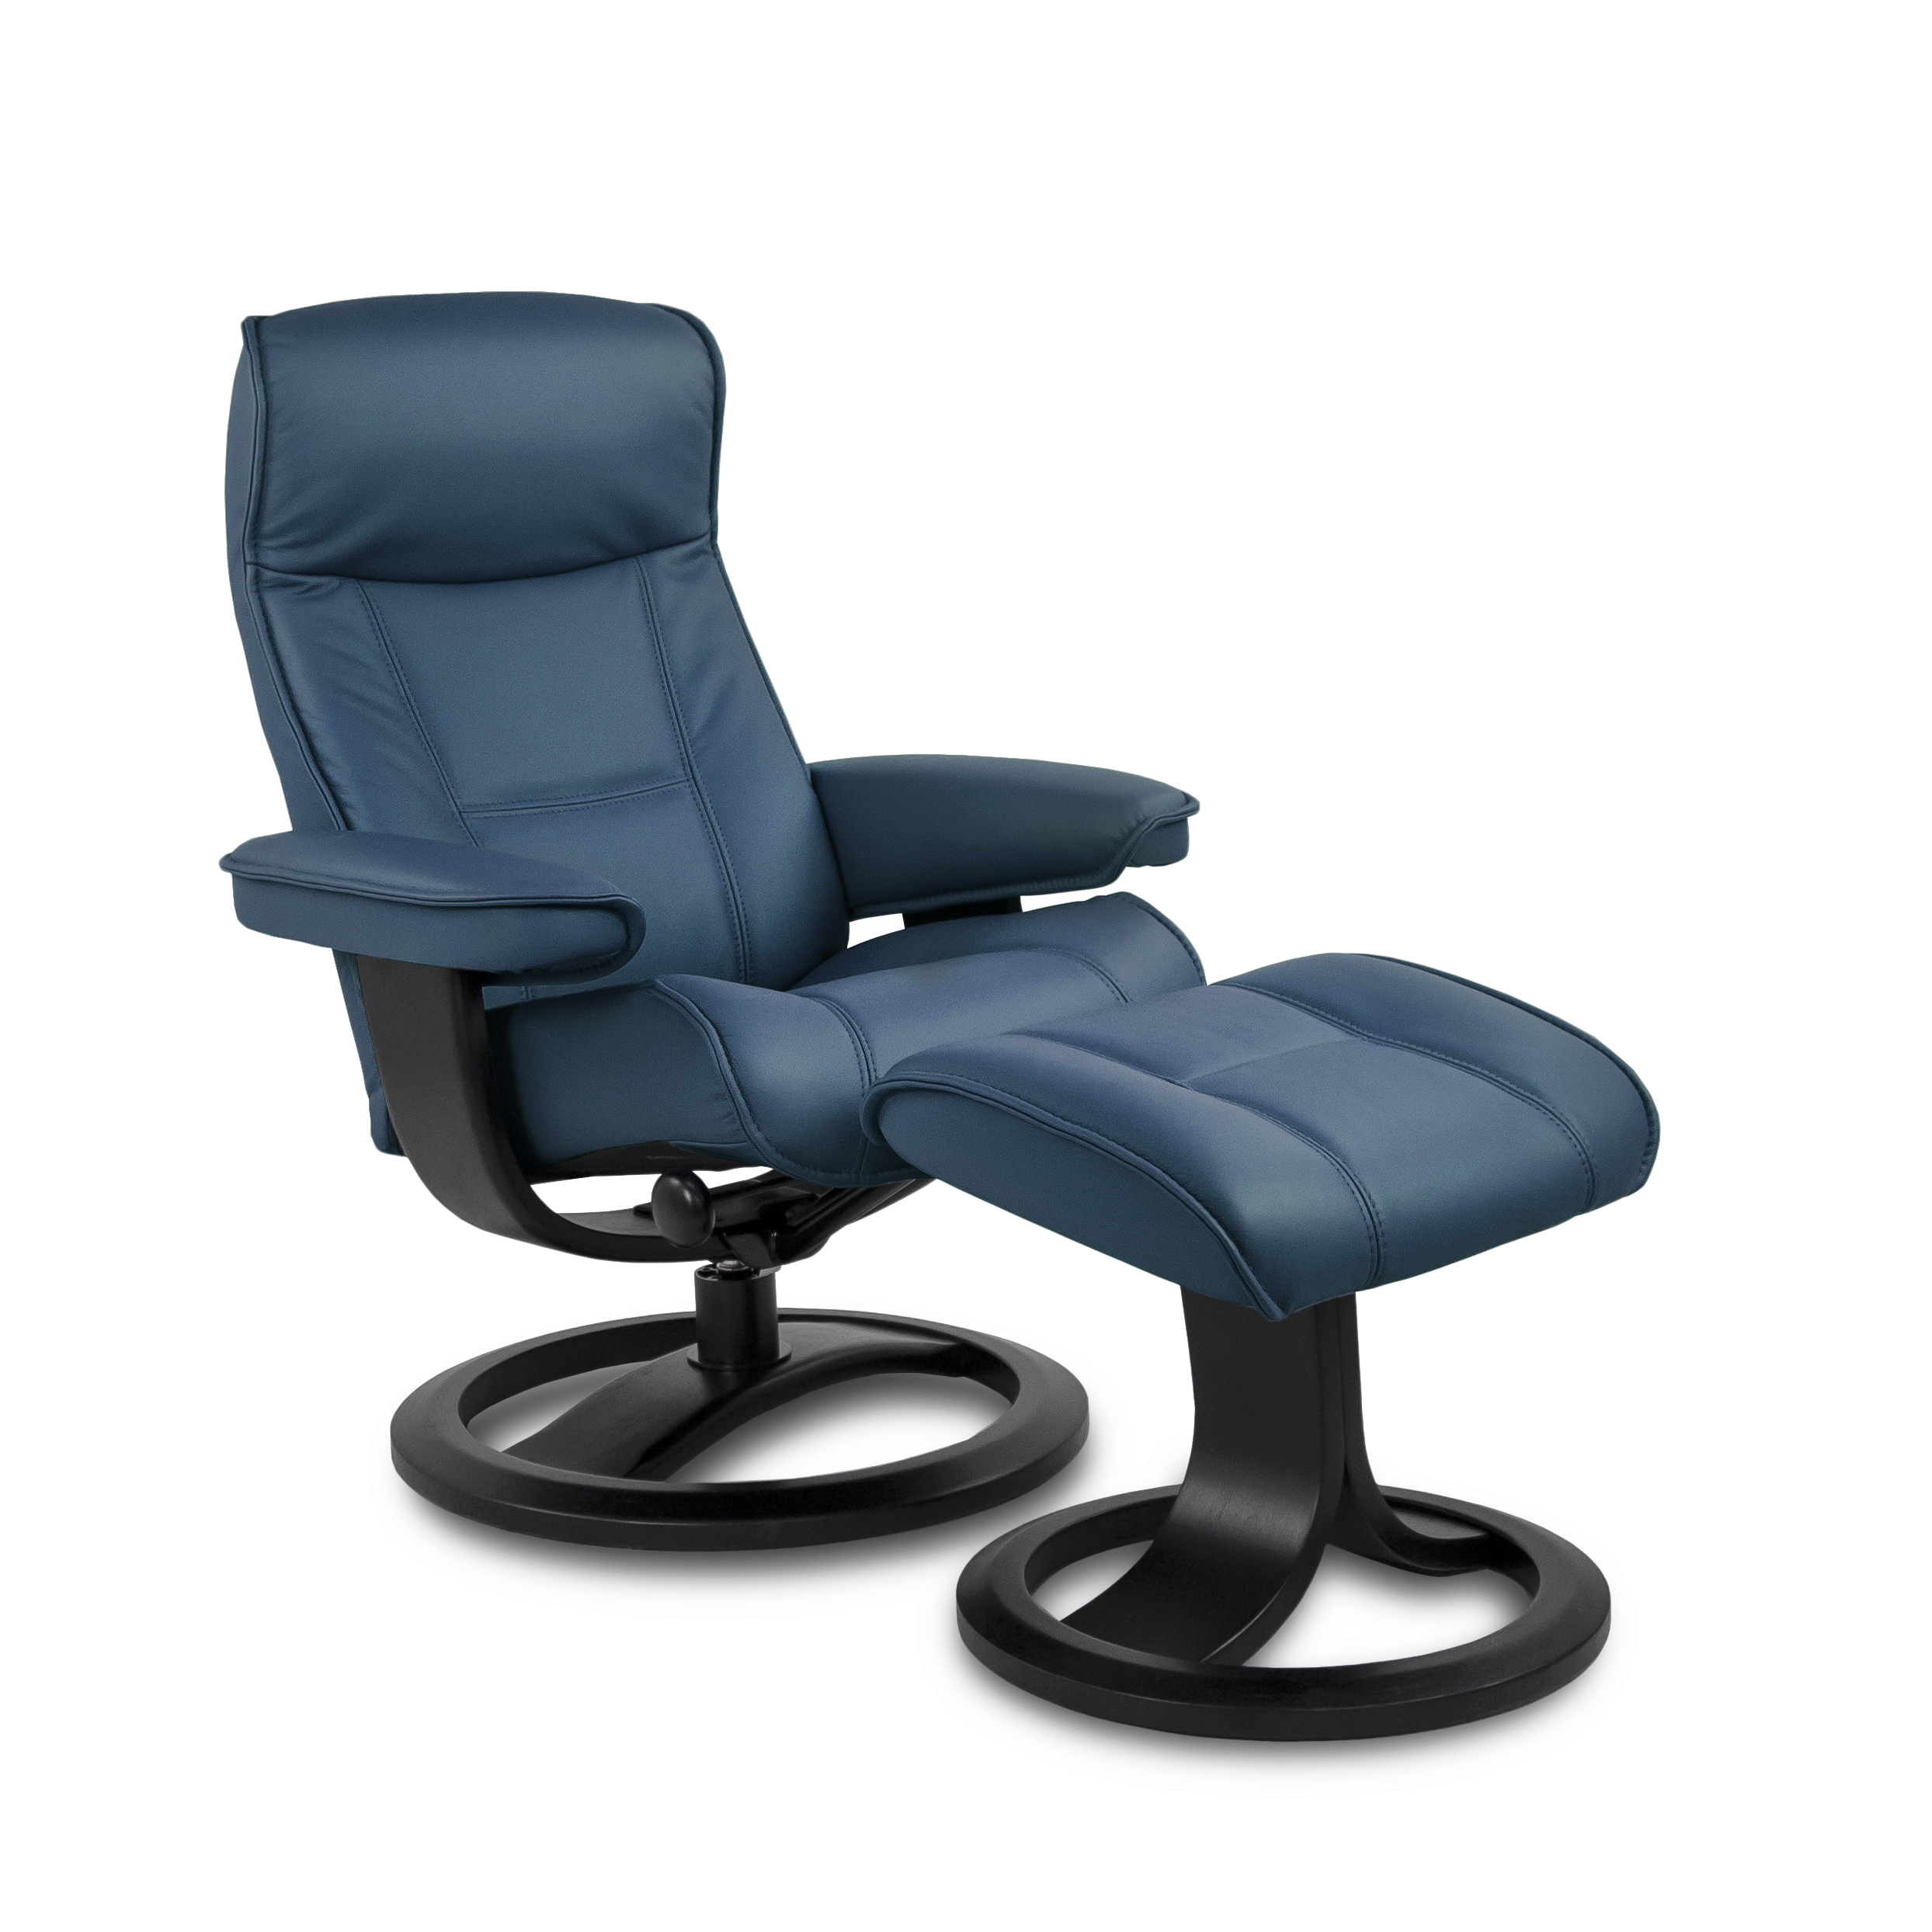 Img Nordic 21 Leather Recliner, Navy Leather Recliner Chairs